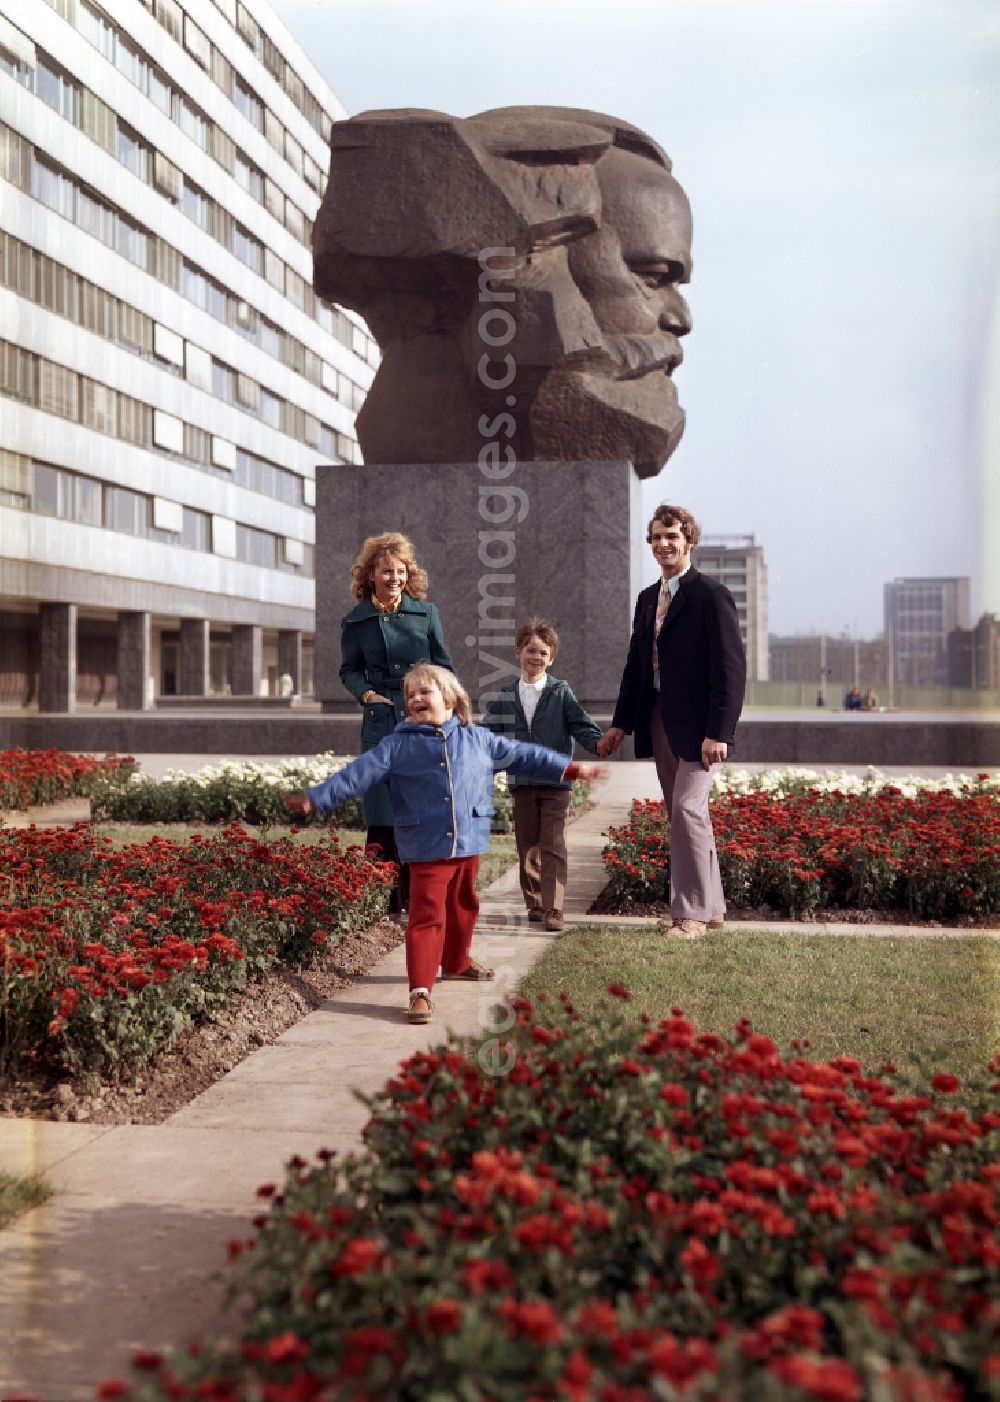 GDR photo archive: Chemnitz - Karl-Marx-Stadt - Young family walks in the park at the monument of the Karl-Marx-Monument of the Brueckenstrasse in the district Zentrum in Chemnitz - Karl-Marx-Stadt, Saxony in the area of the former GDR, German Democratic Republic